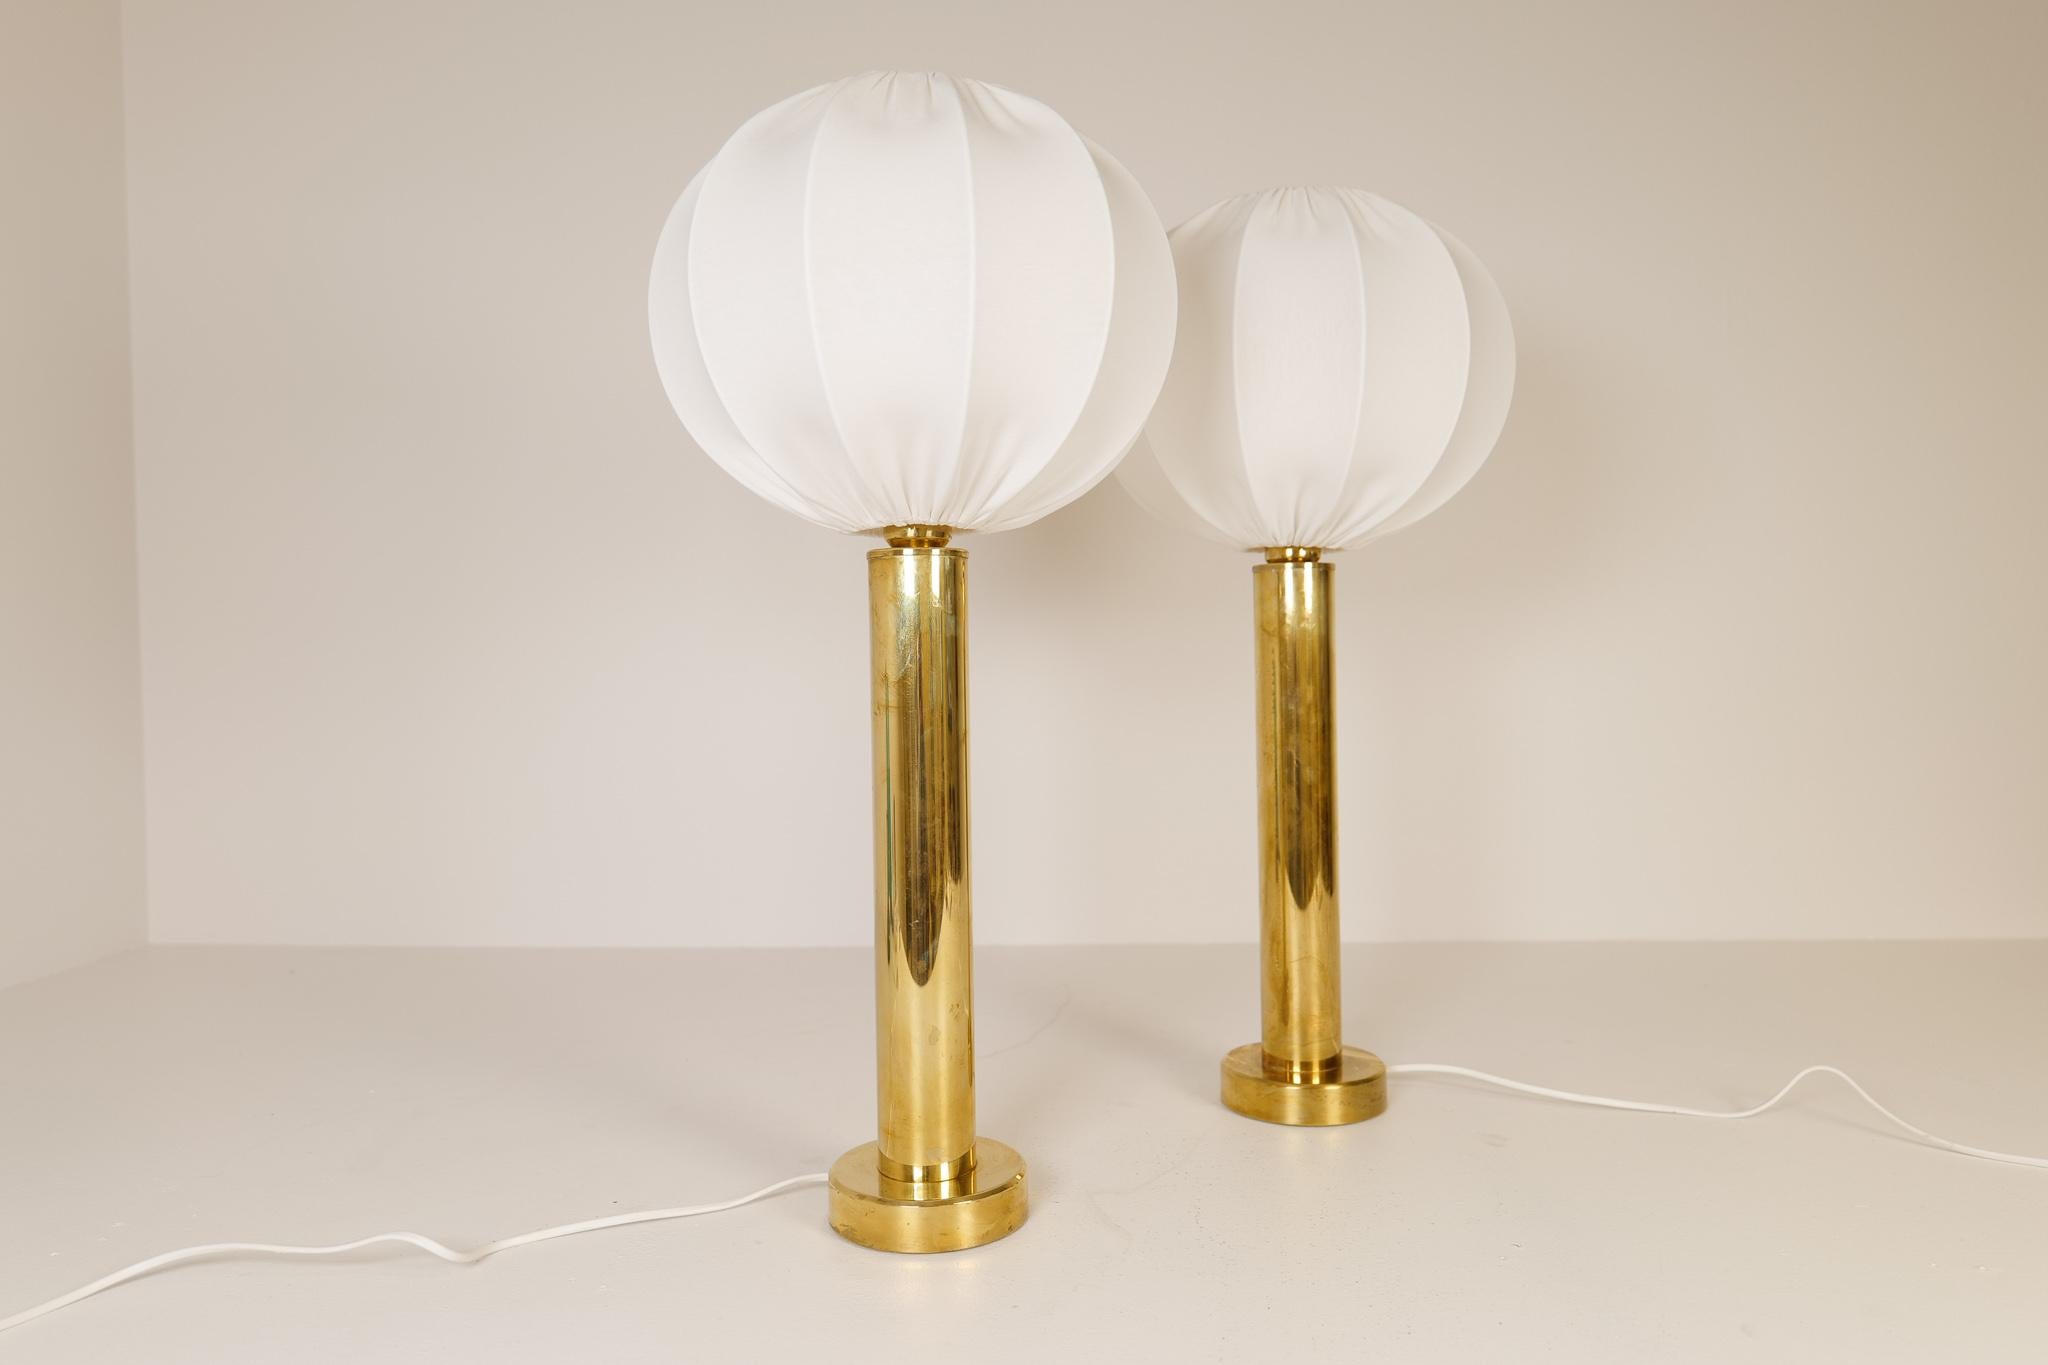 Midcentury Pair of Brass Table Lamps by Kosta Elarmatur, Sweden, 1960s For Sale 6